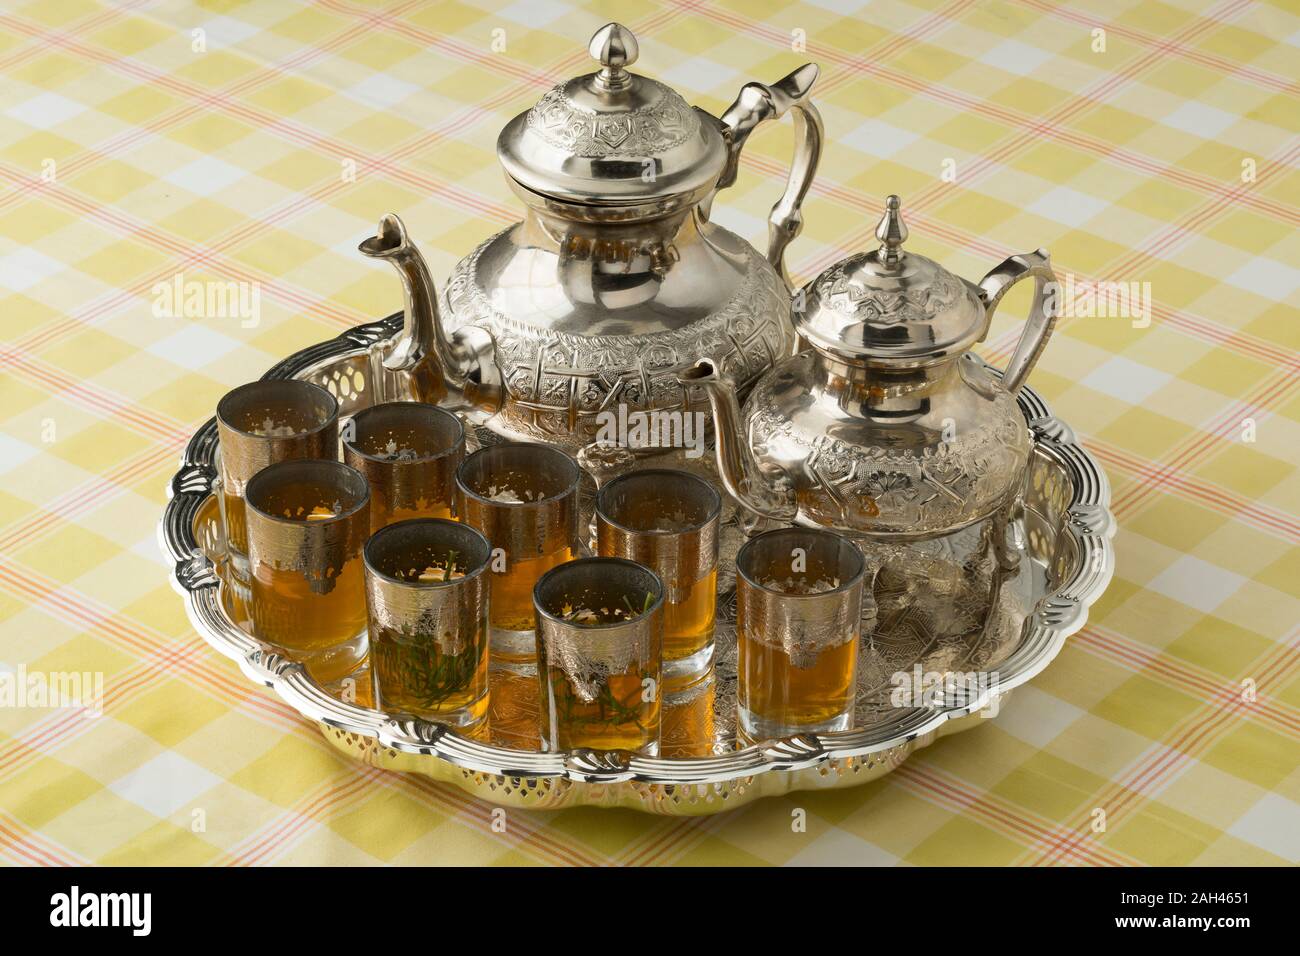 Moroccan tea tray with two teapots with and without sugar, and glasses with and without absinthium herb Stock Photo